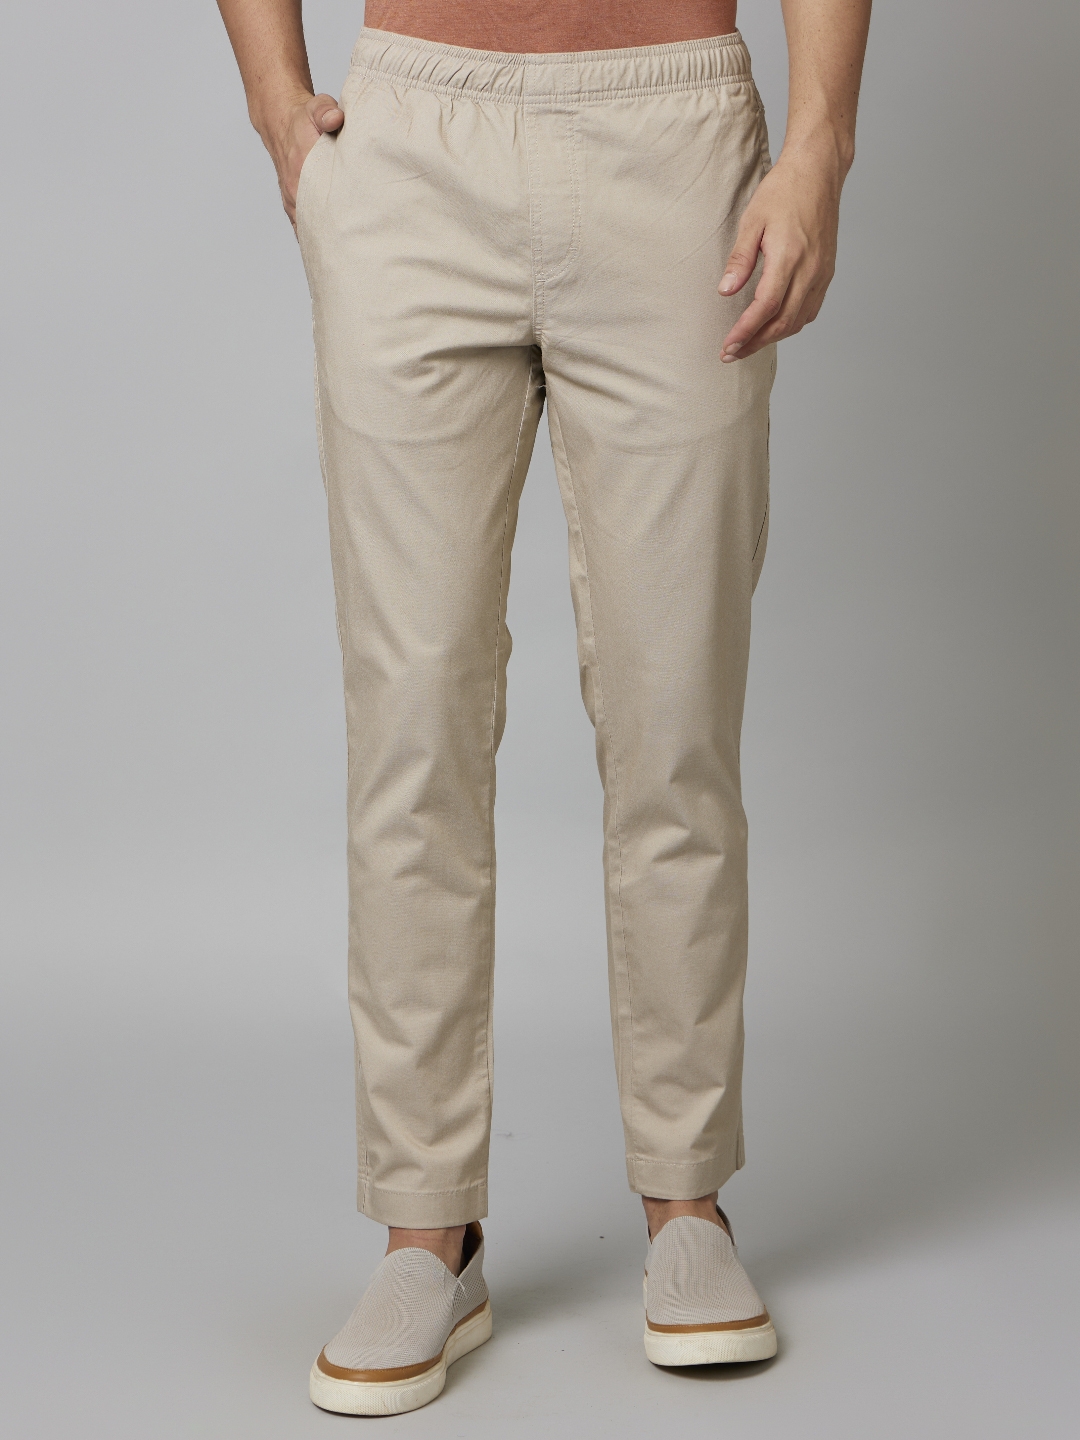 Haggar Regular Fit Solid Beige Khaki Chinos Flat Front Washable Cotton Pants  | The Suit Depot